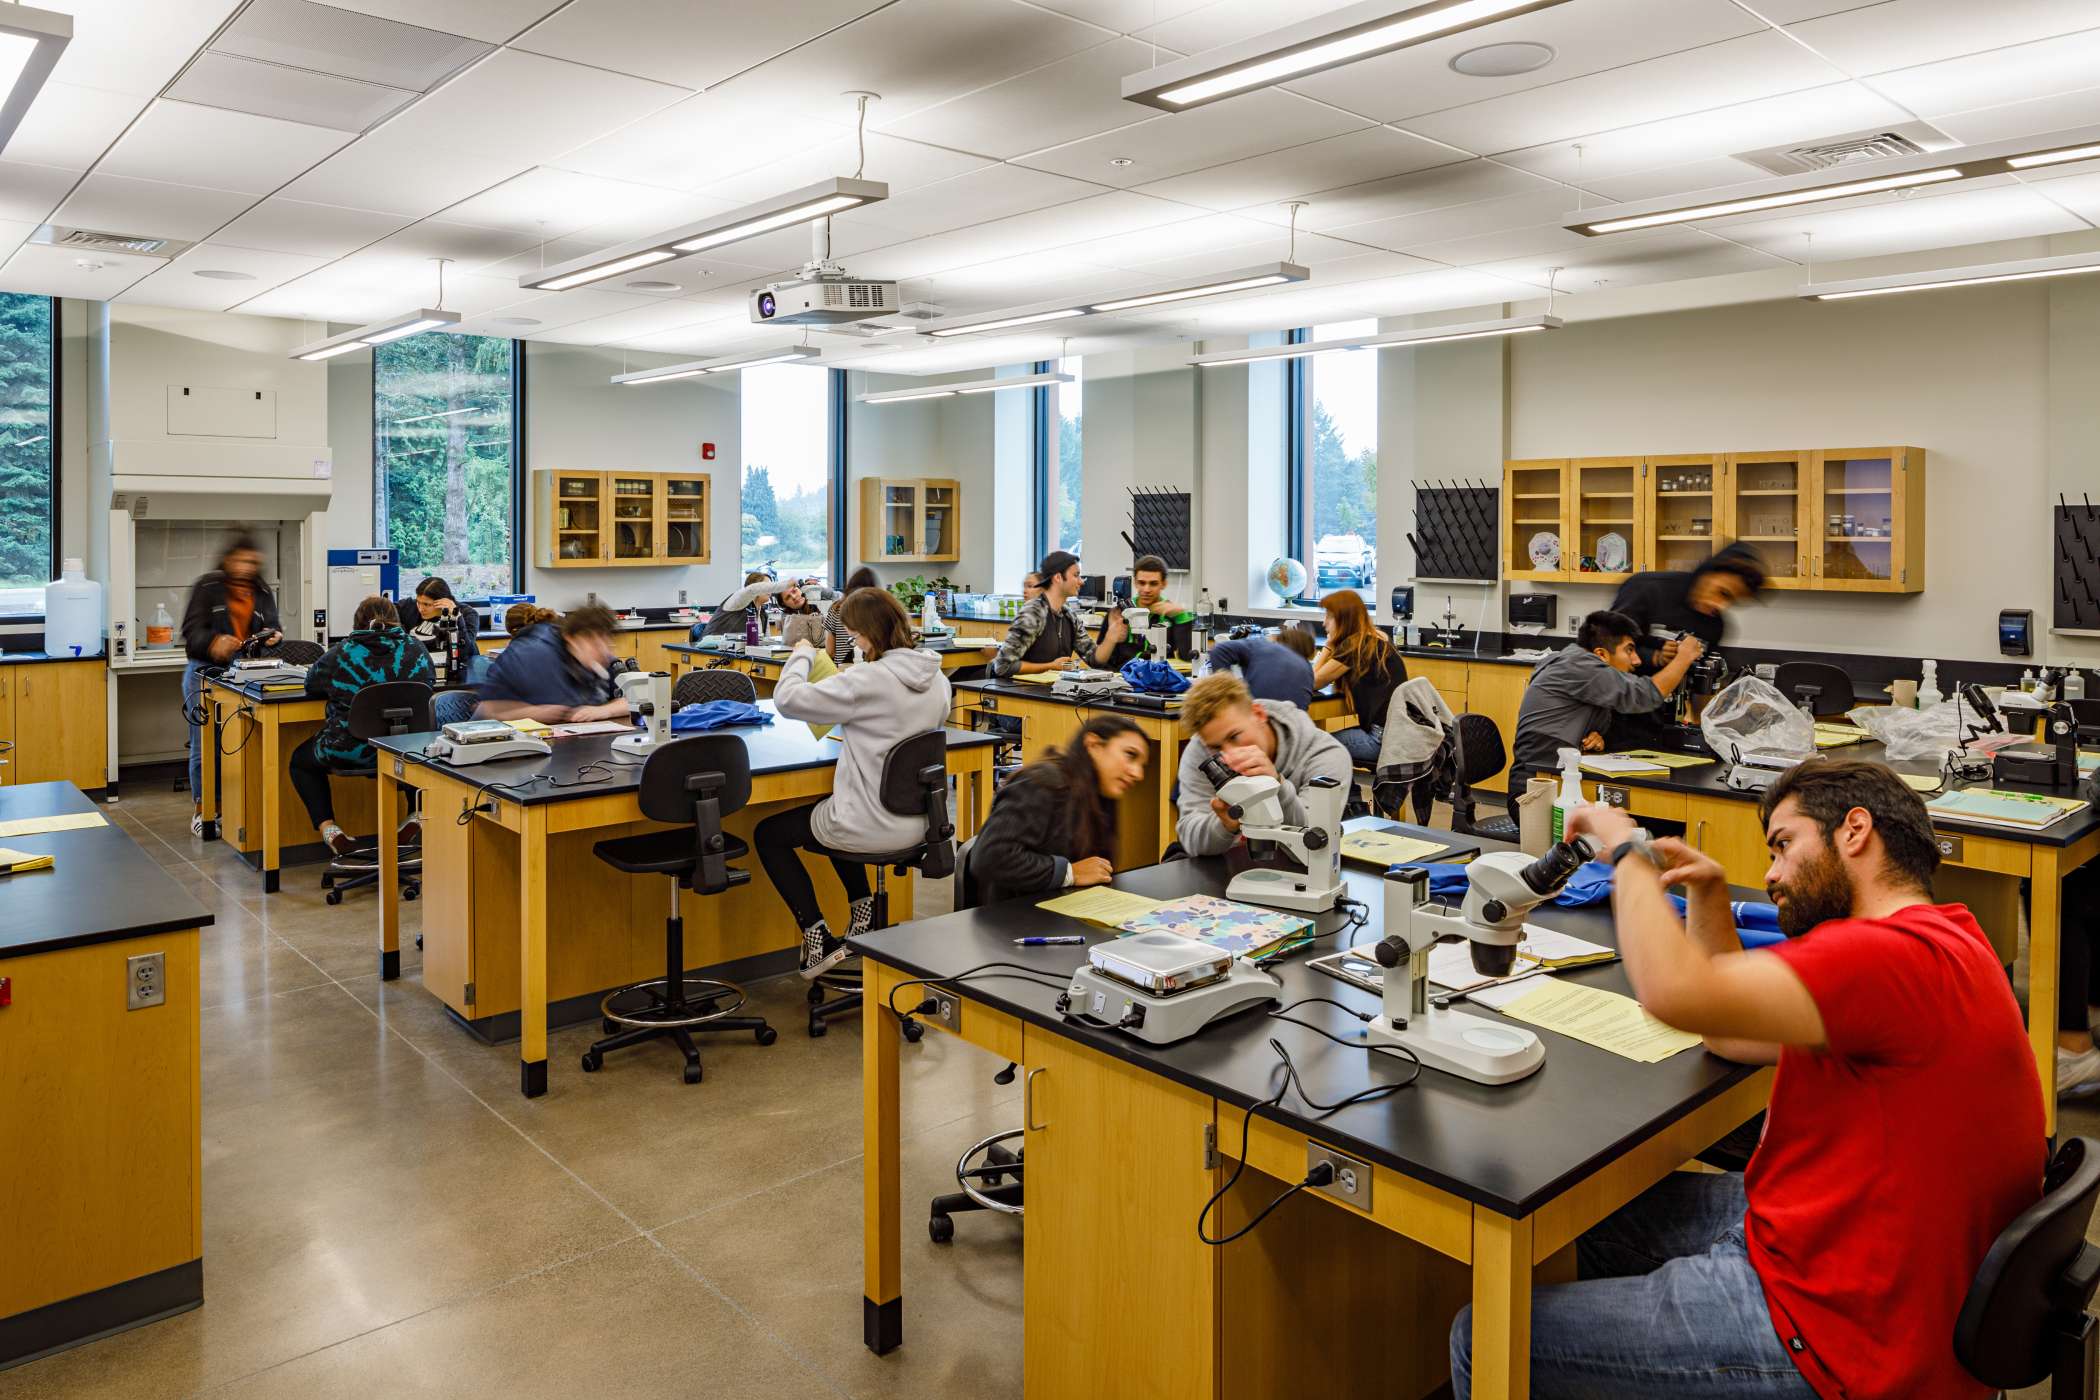 A busy chemistry lab, students at their microscopes